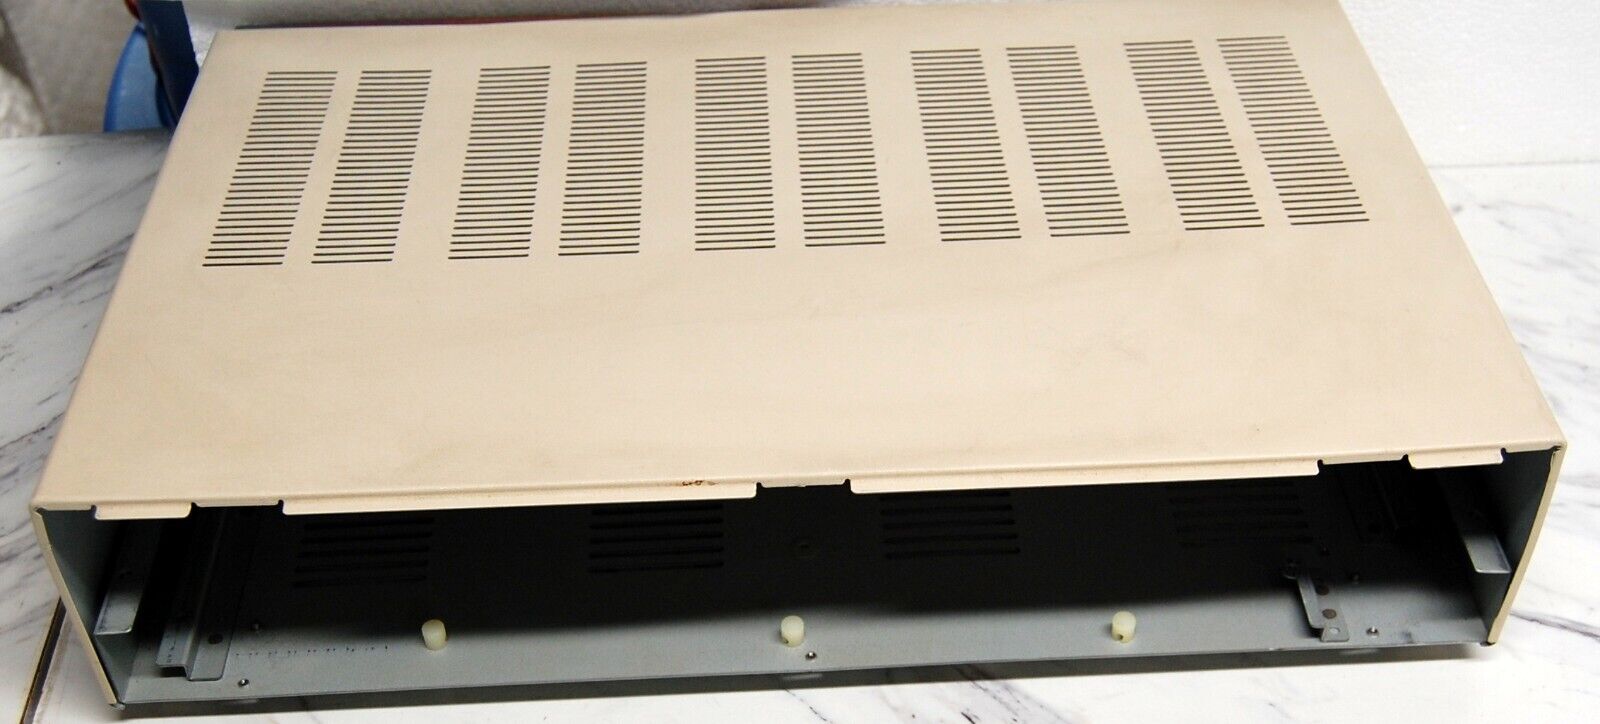 Vintage NEC PC-8801A  Case (as pictured)